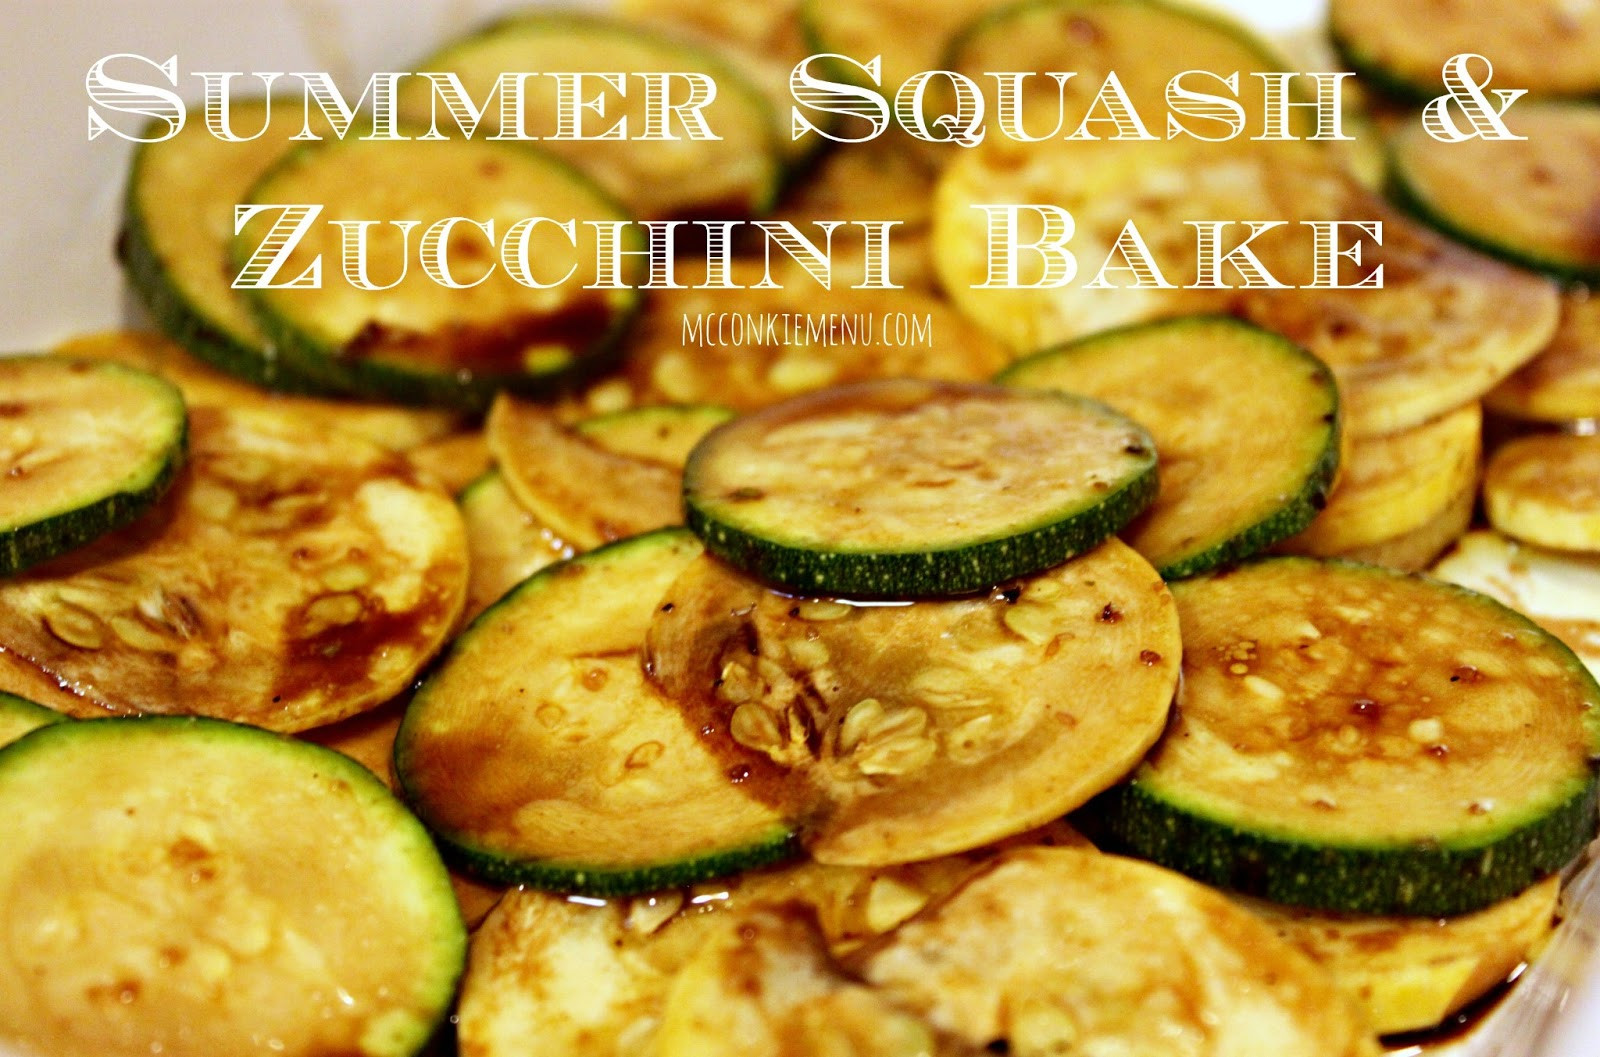 Zucchini And Summer Squash Recipes
 McConkie Menu Summer Squash and Zucchini Bake